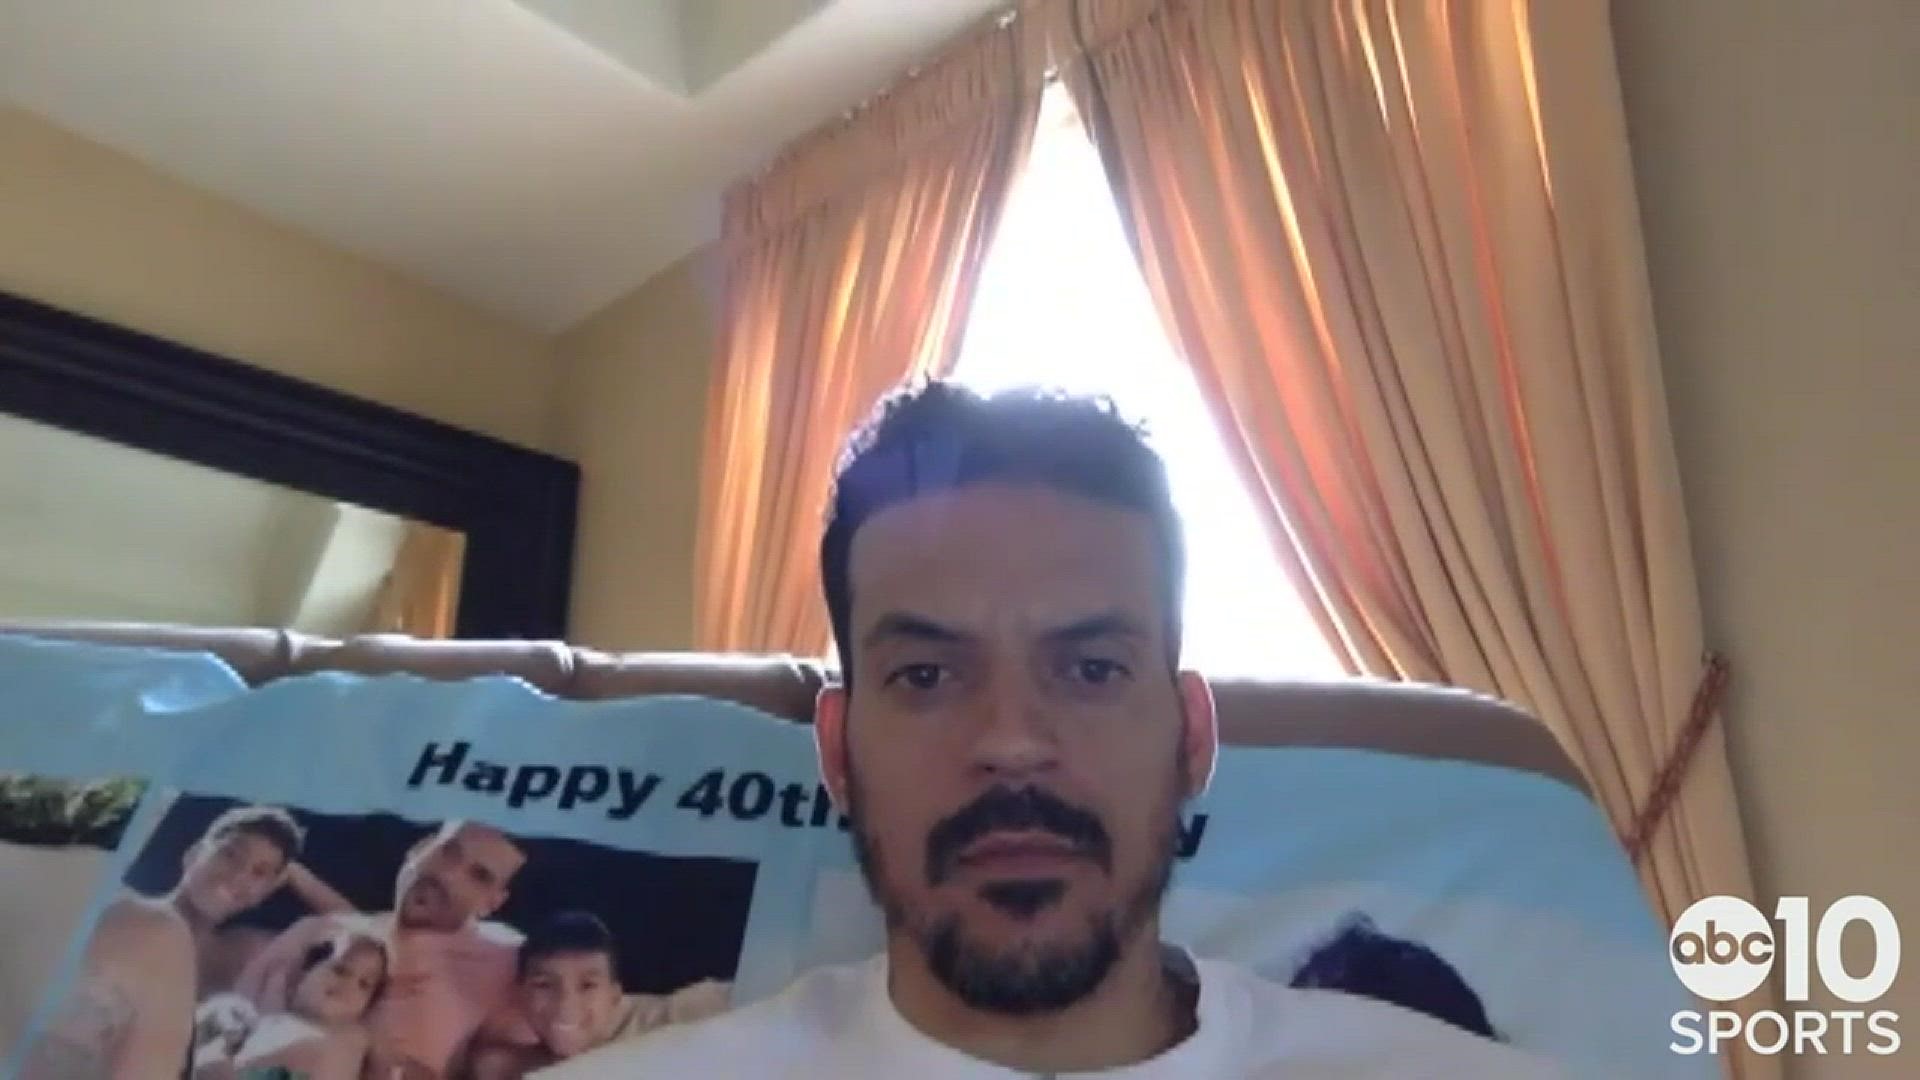 Sacramento native Matt Barnes, who played 14 seasons in the NBA, discusses assisting healthcare workers in his hometown & his popular "All the Smoke" podcast.